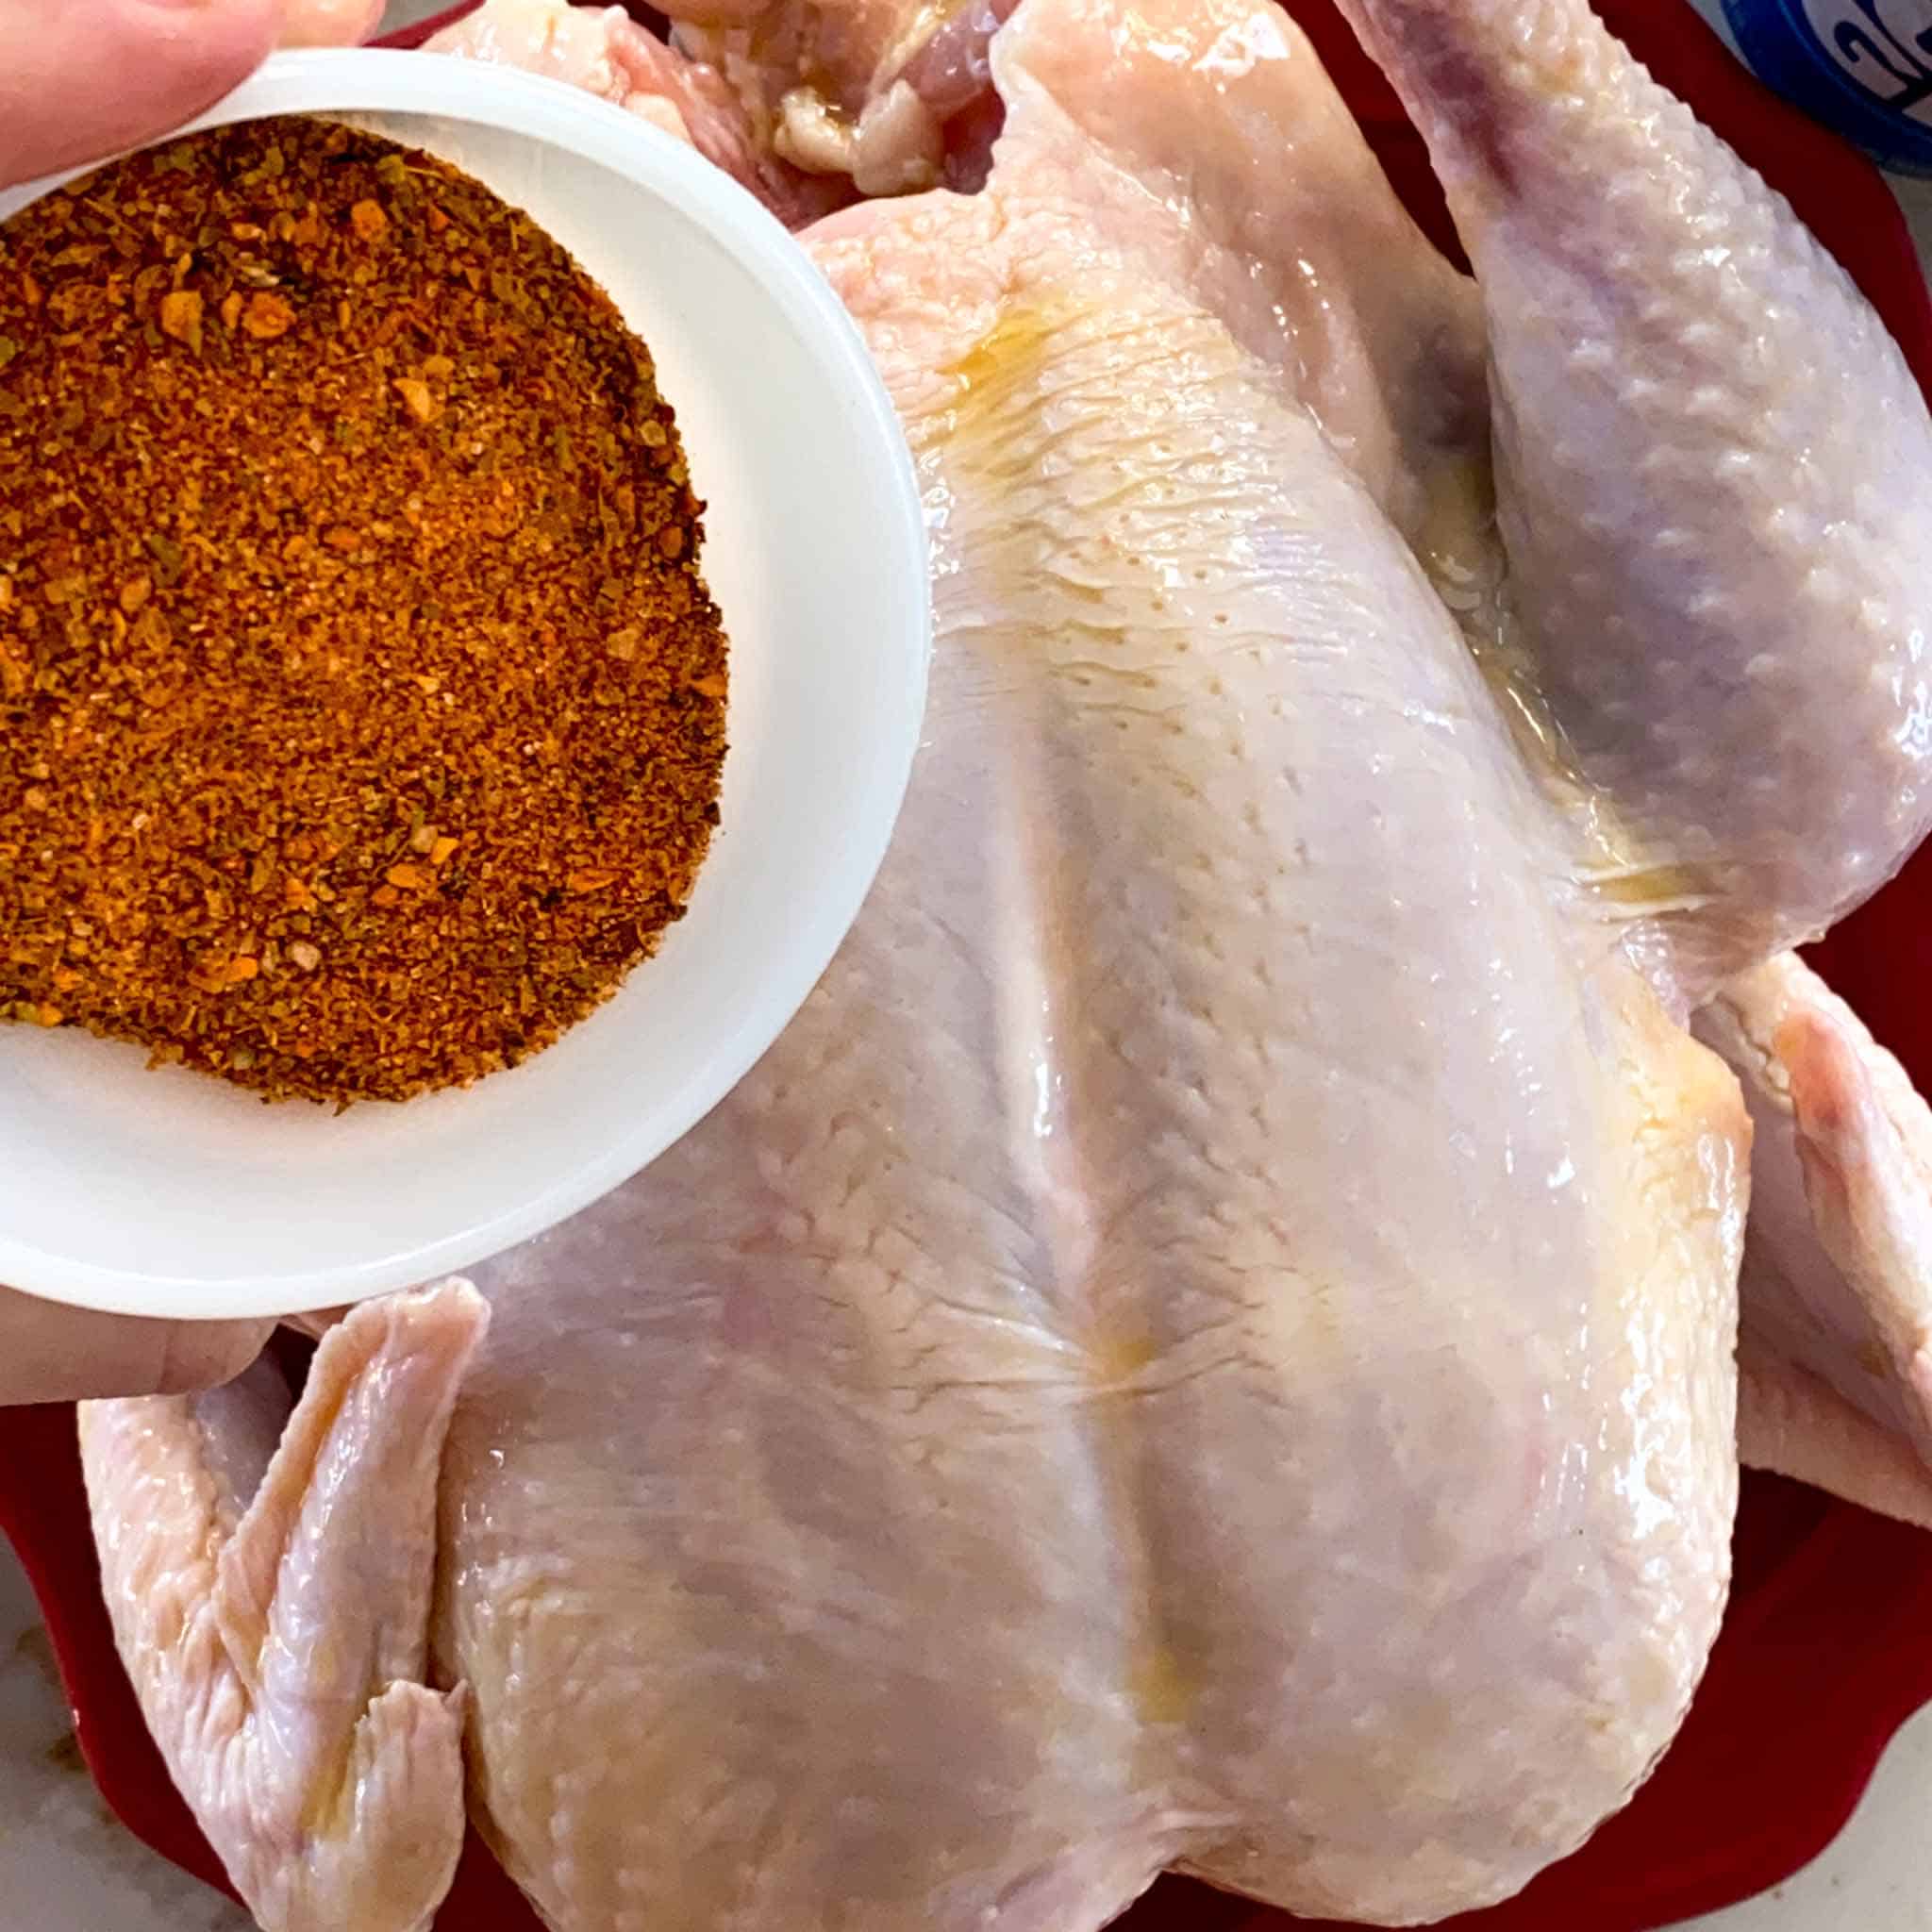 Chicken rub being poured onto a raw chicken, ready to go into the smoker.